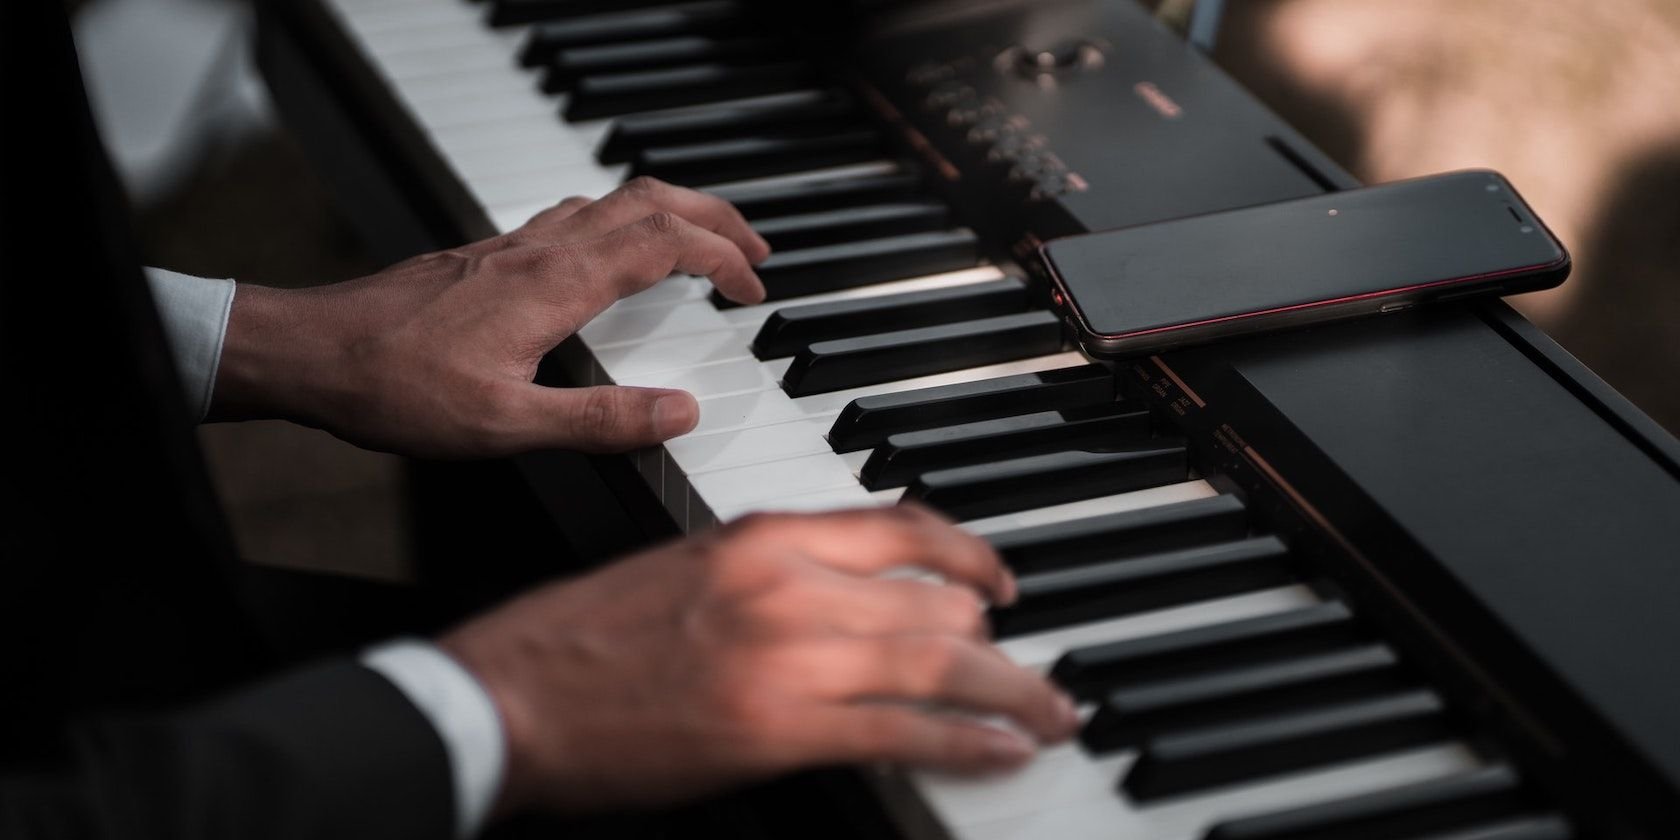 Learn to Play Piano With These 6 iPhone Apps